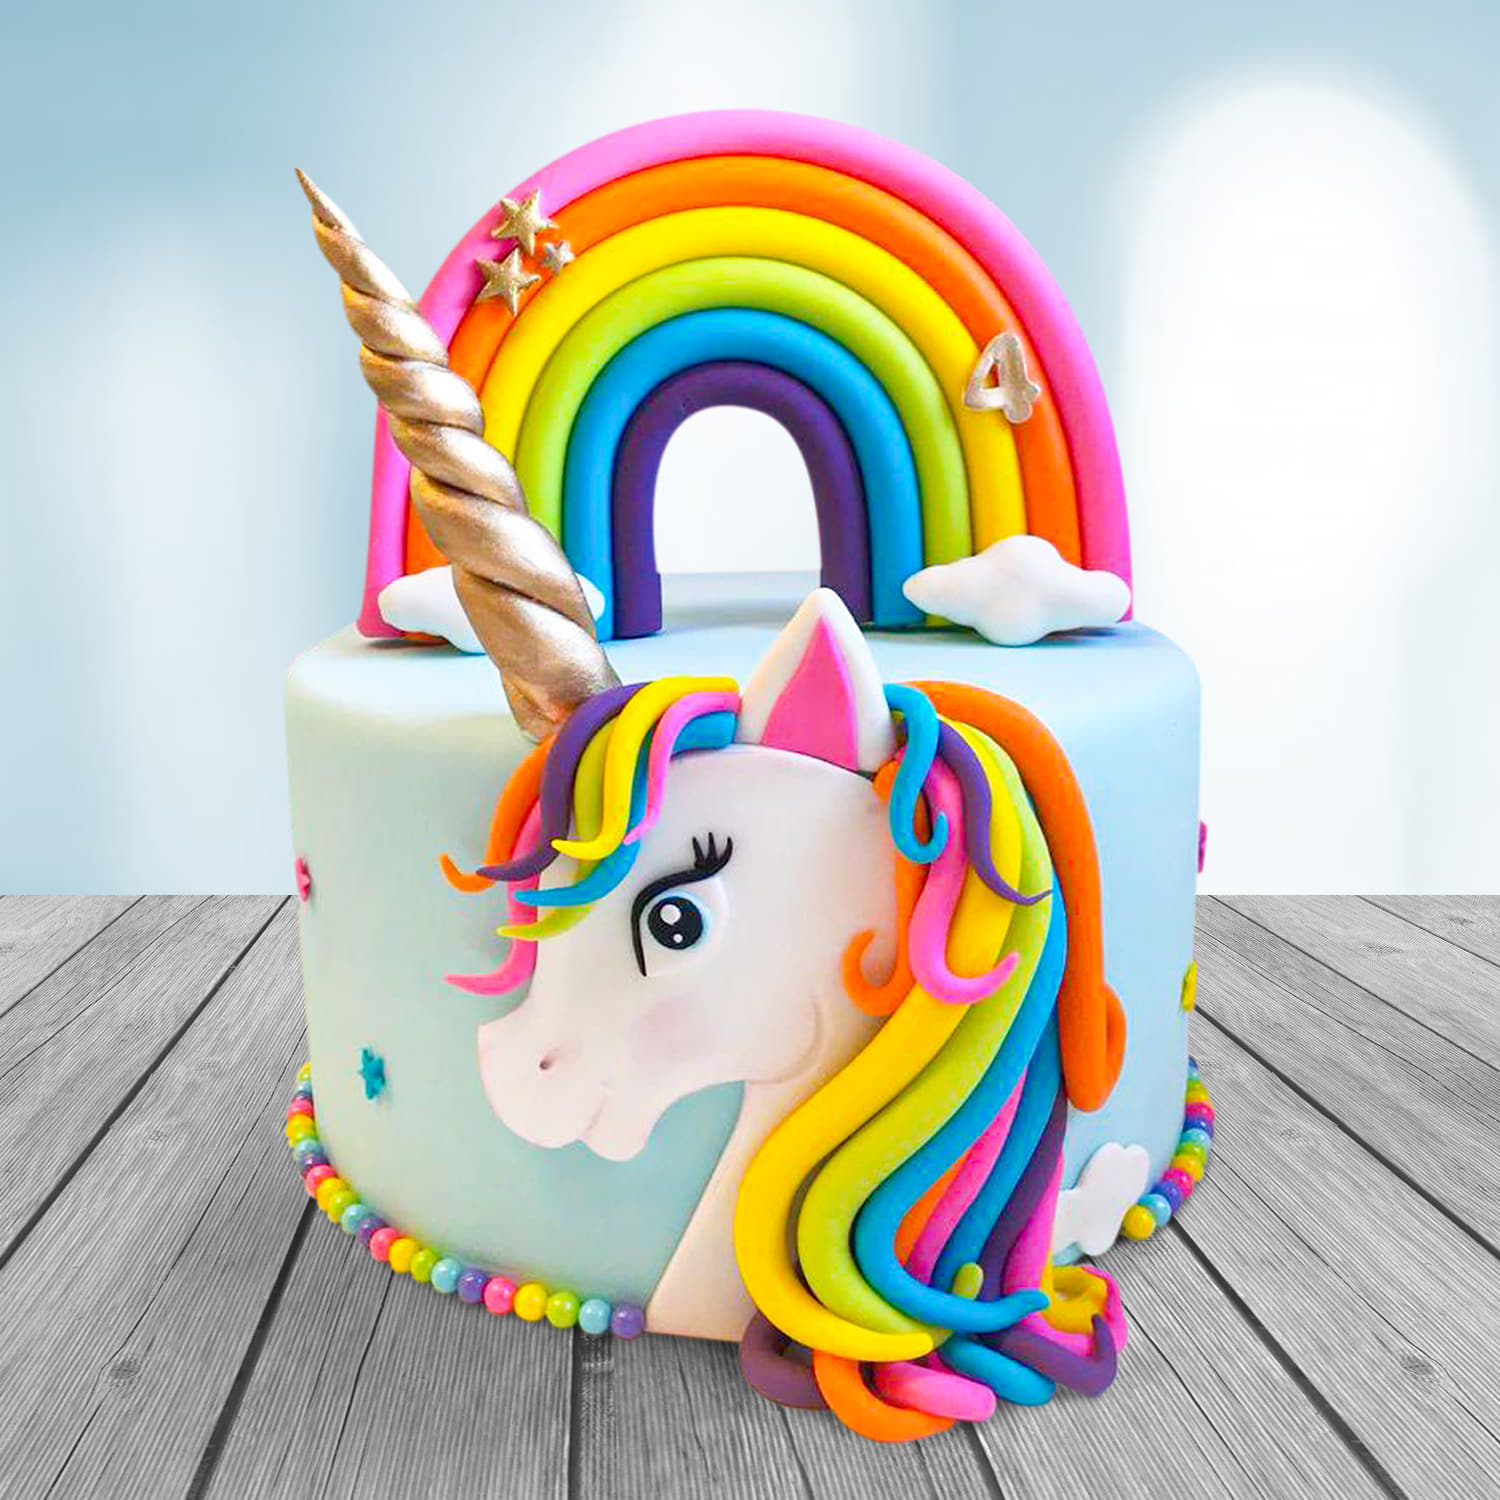 1.5 KG Unicorn Drawing Cake, Super Cake- Online Cake delivery in Noida, Cake  Shops with Midnight & Same Day Delivery